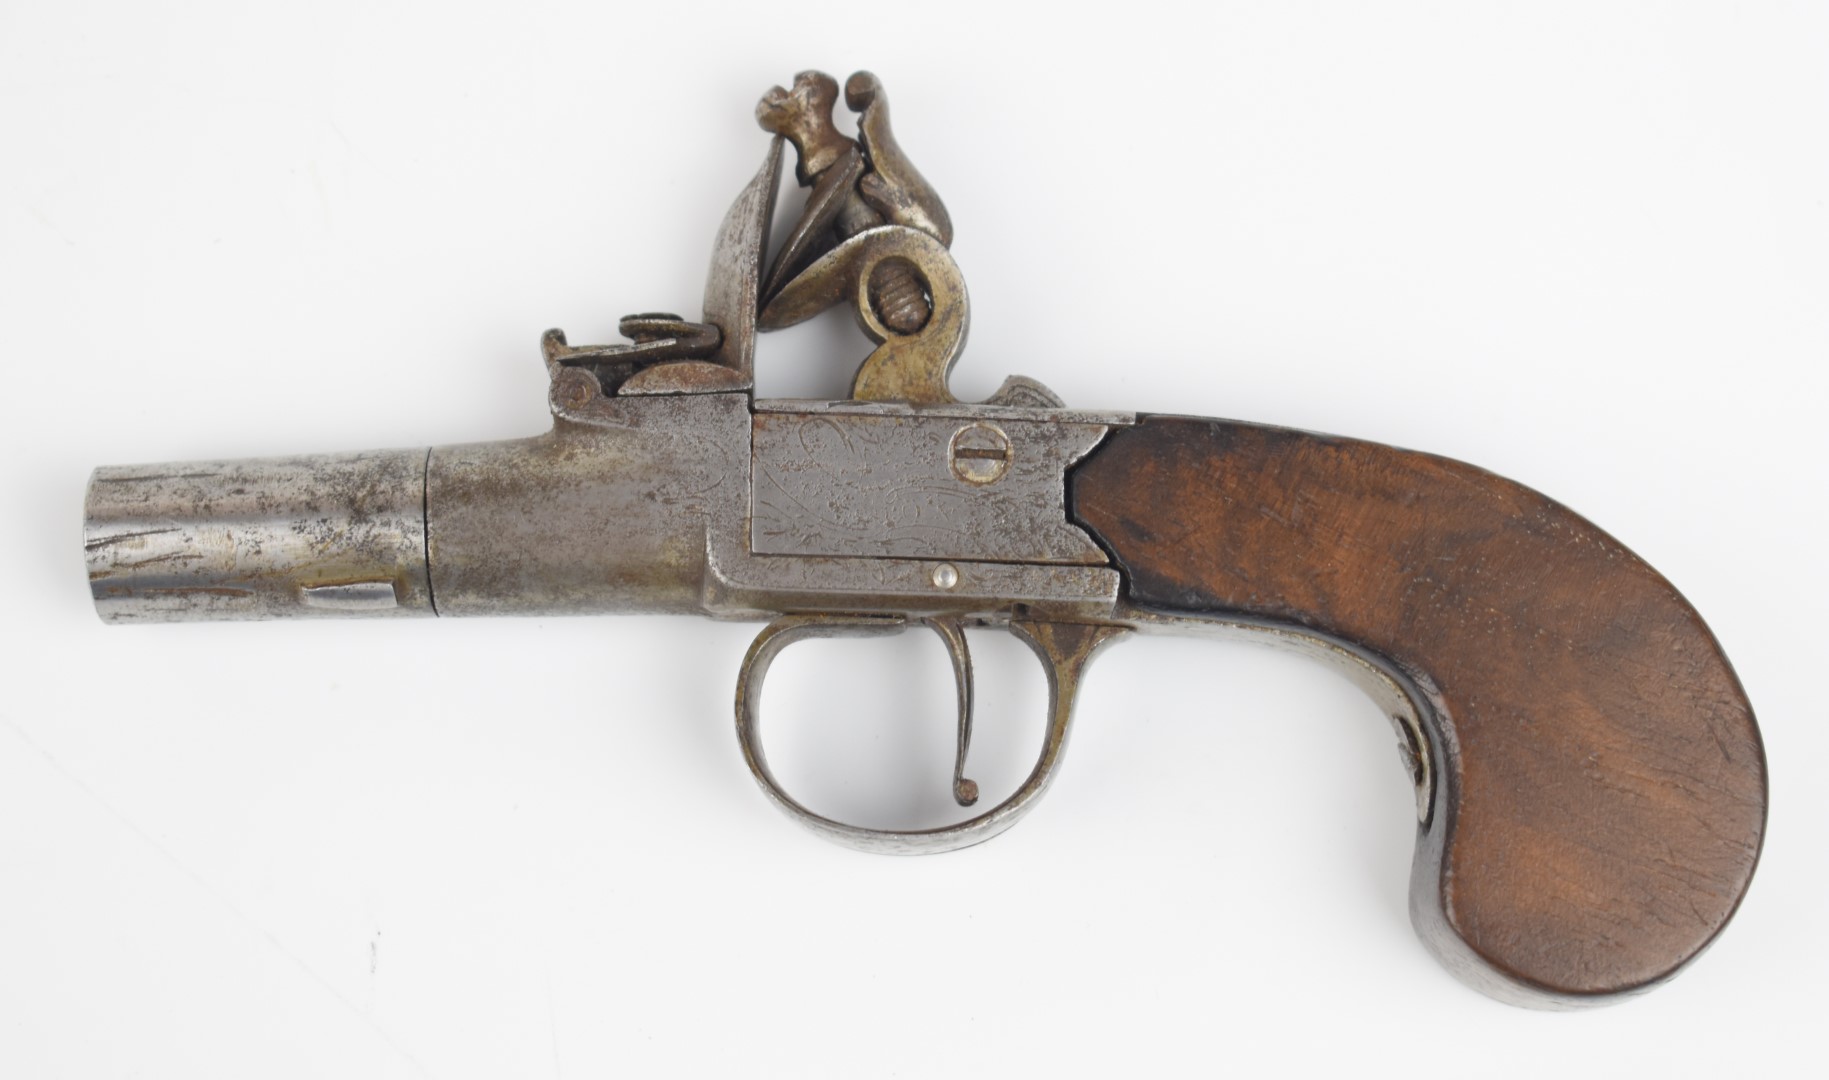 Indistinctly named flintlock pocket pistol with engraved lock and hammer, vacant shield shaped - Image 2 of 11